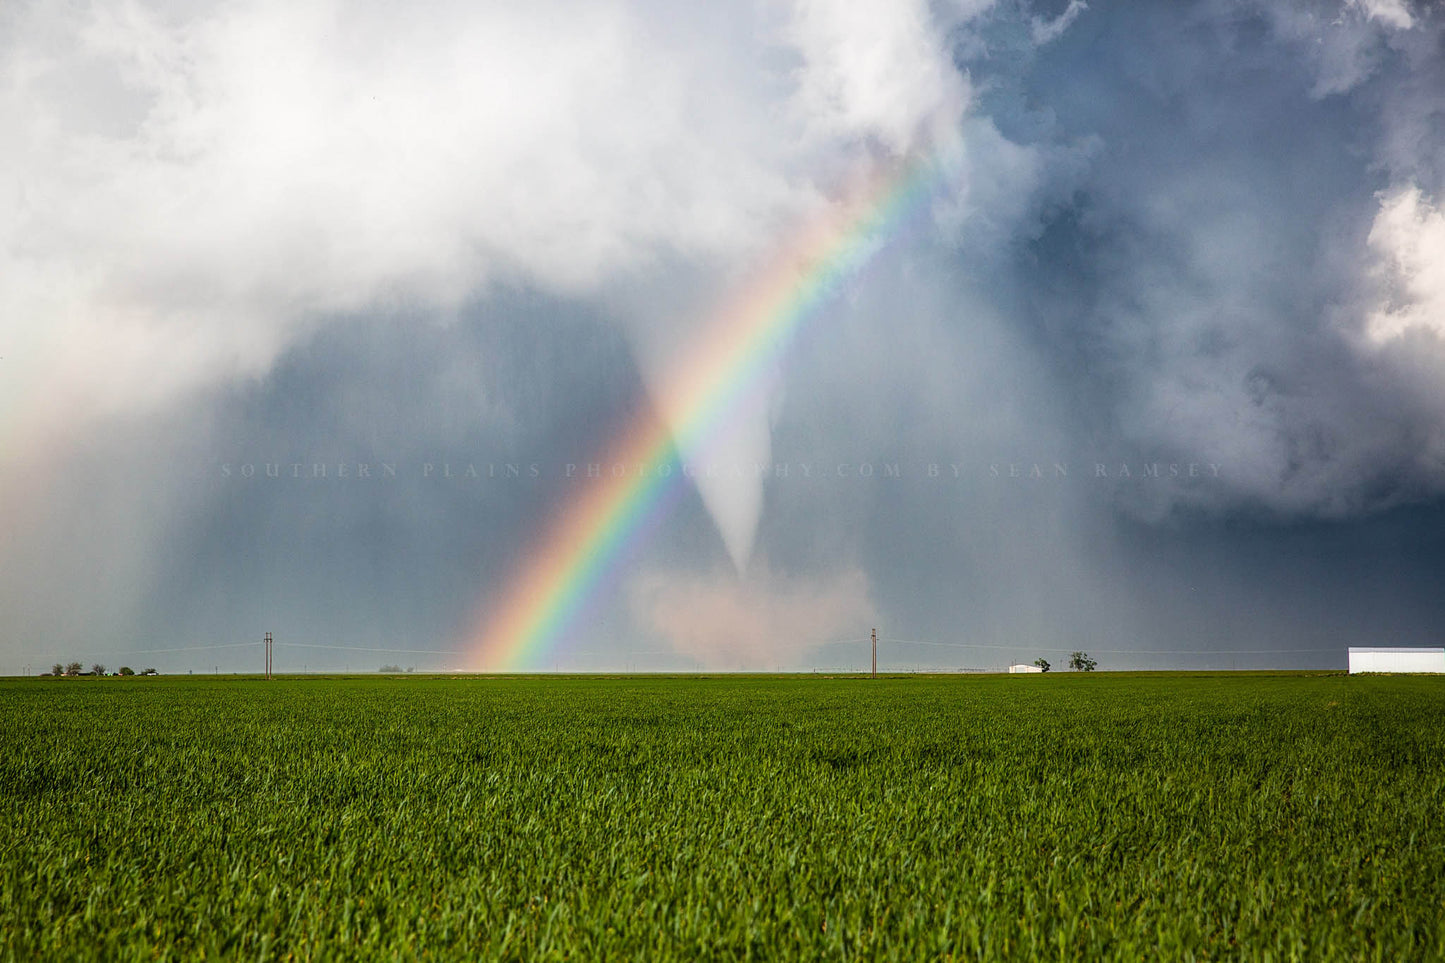 Storm photography print of a white tornado passing through a rainbow as it spins up dust in a field on a stormy spring day in Texas by Sean Ramsey of Southern Plains Photography.